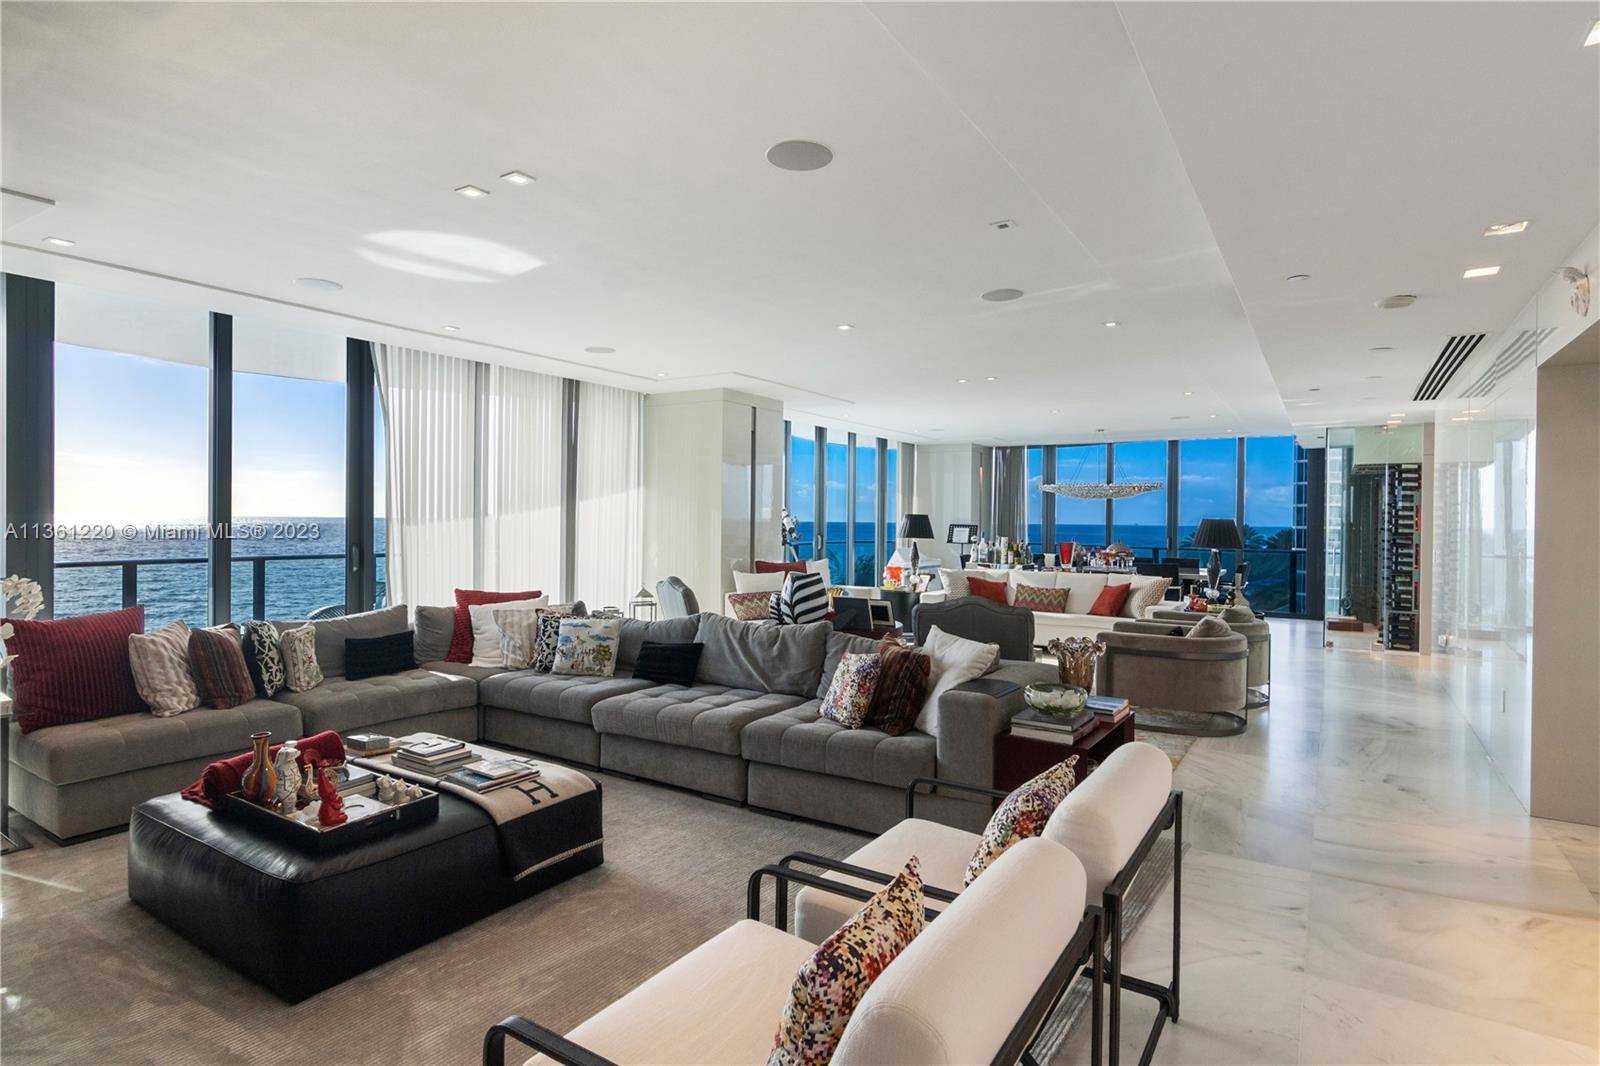 Residence 5 at the prestigious and luxurious Regalia is a one of a kind full floor apartment, featuring 360 degrees of unobstructed ocean, garden and intracoastal views.